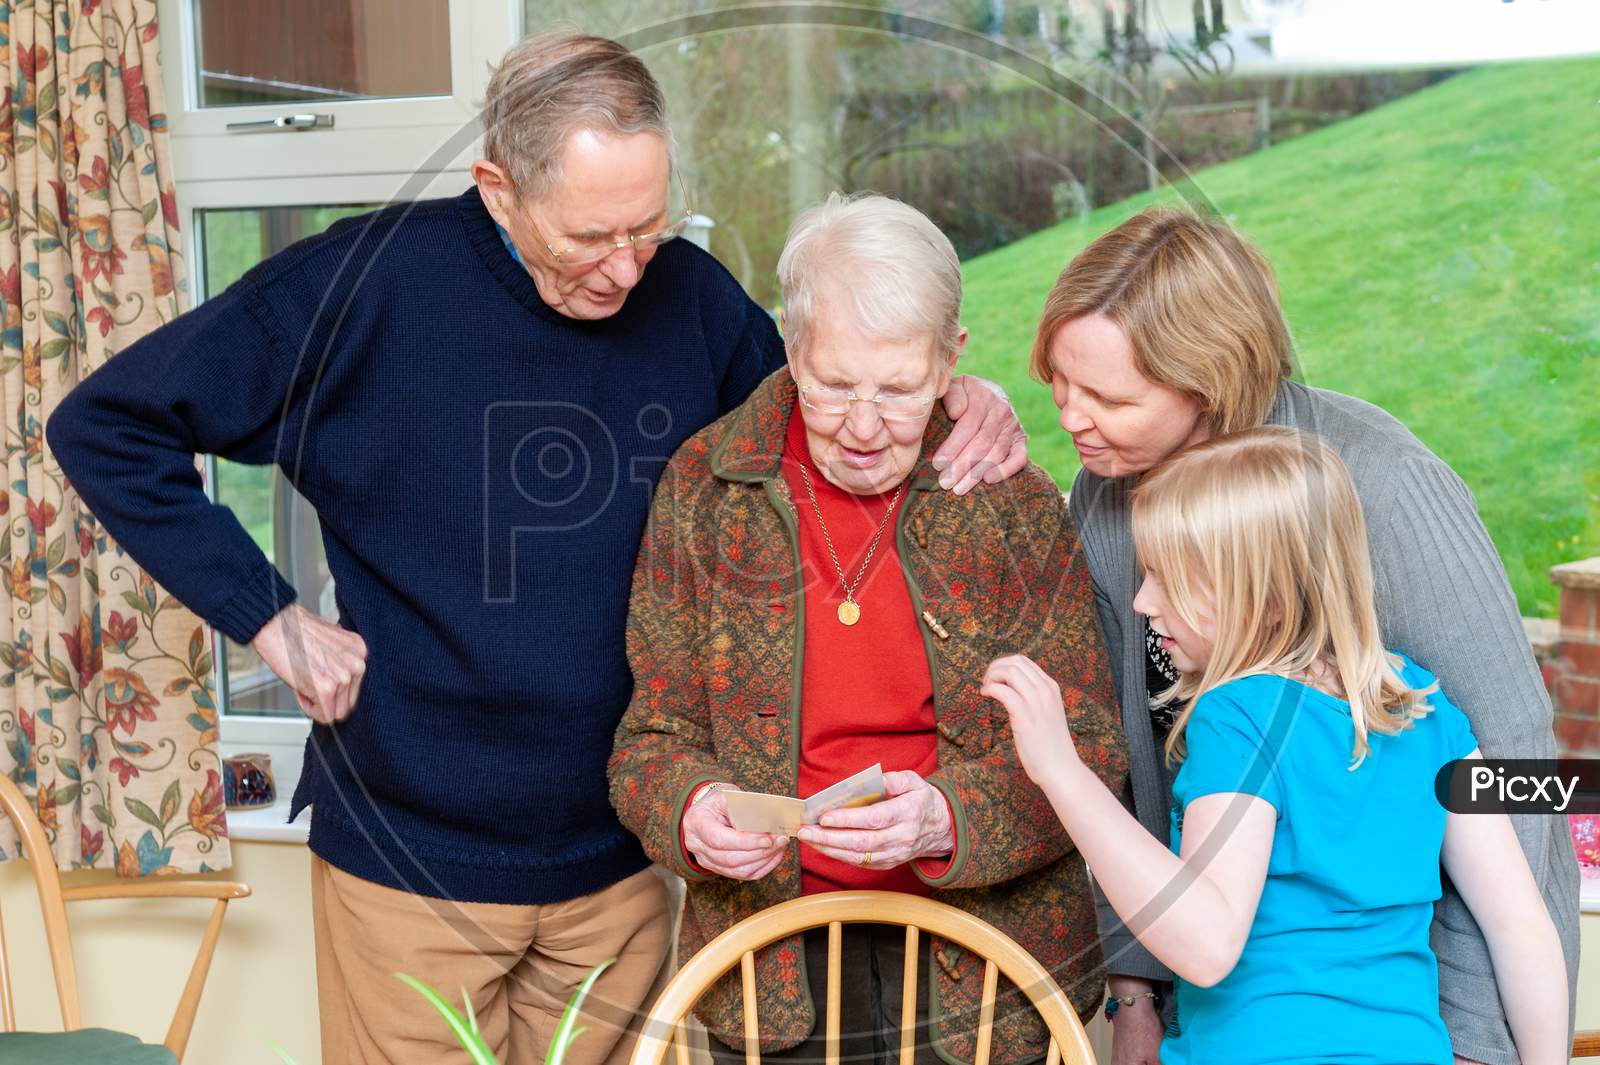 Three Generations Of A Family Gather Around While An Elderly Lady Reads A Birthday Card